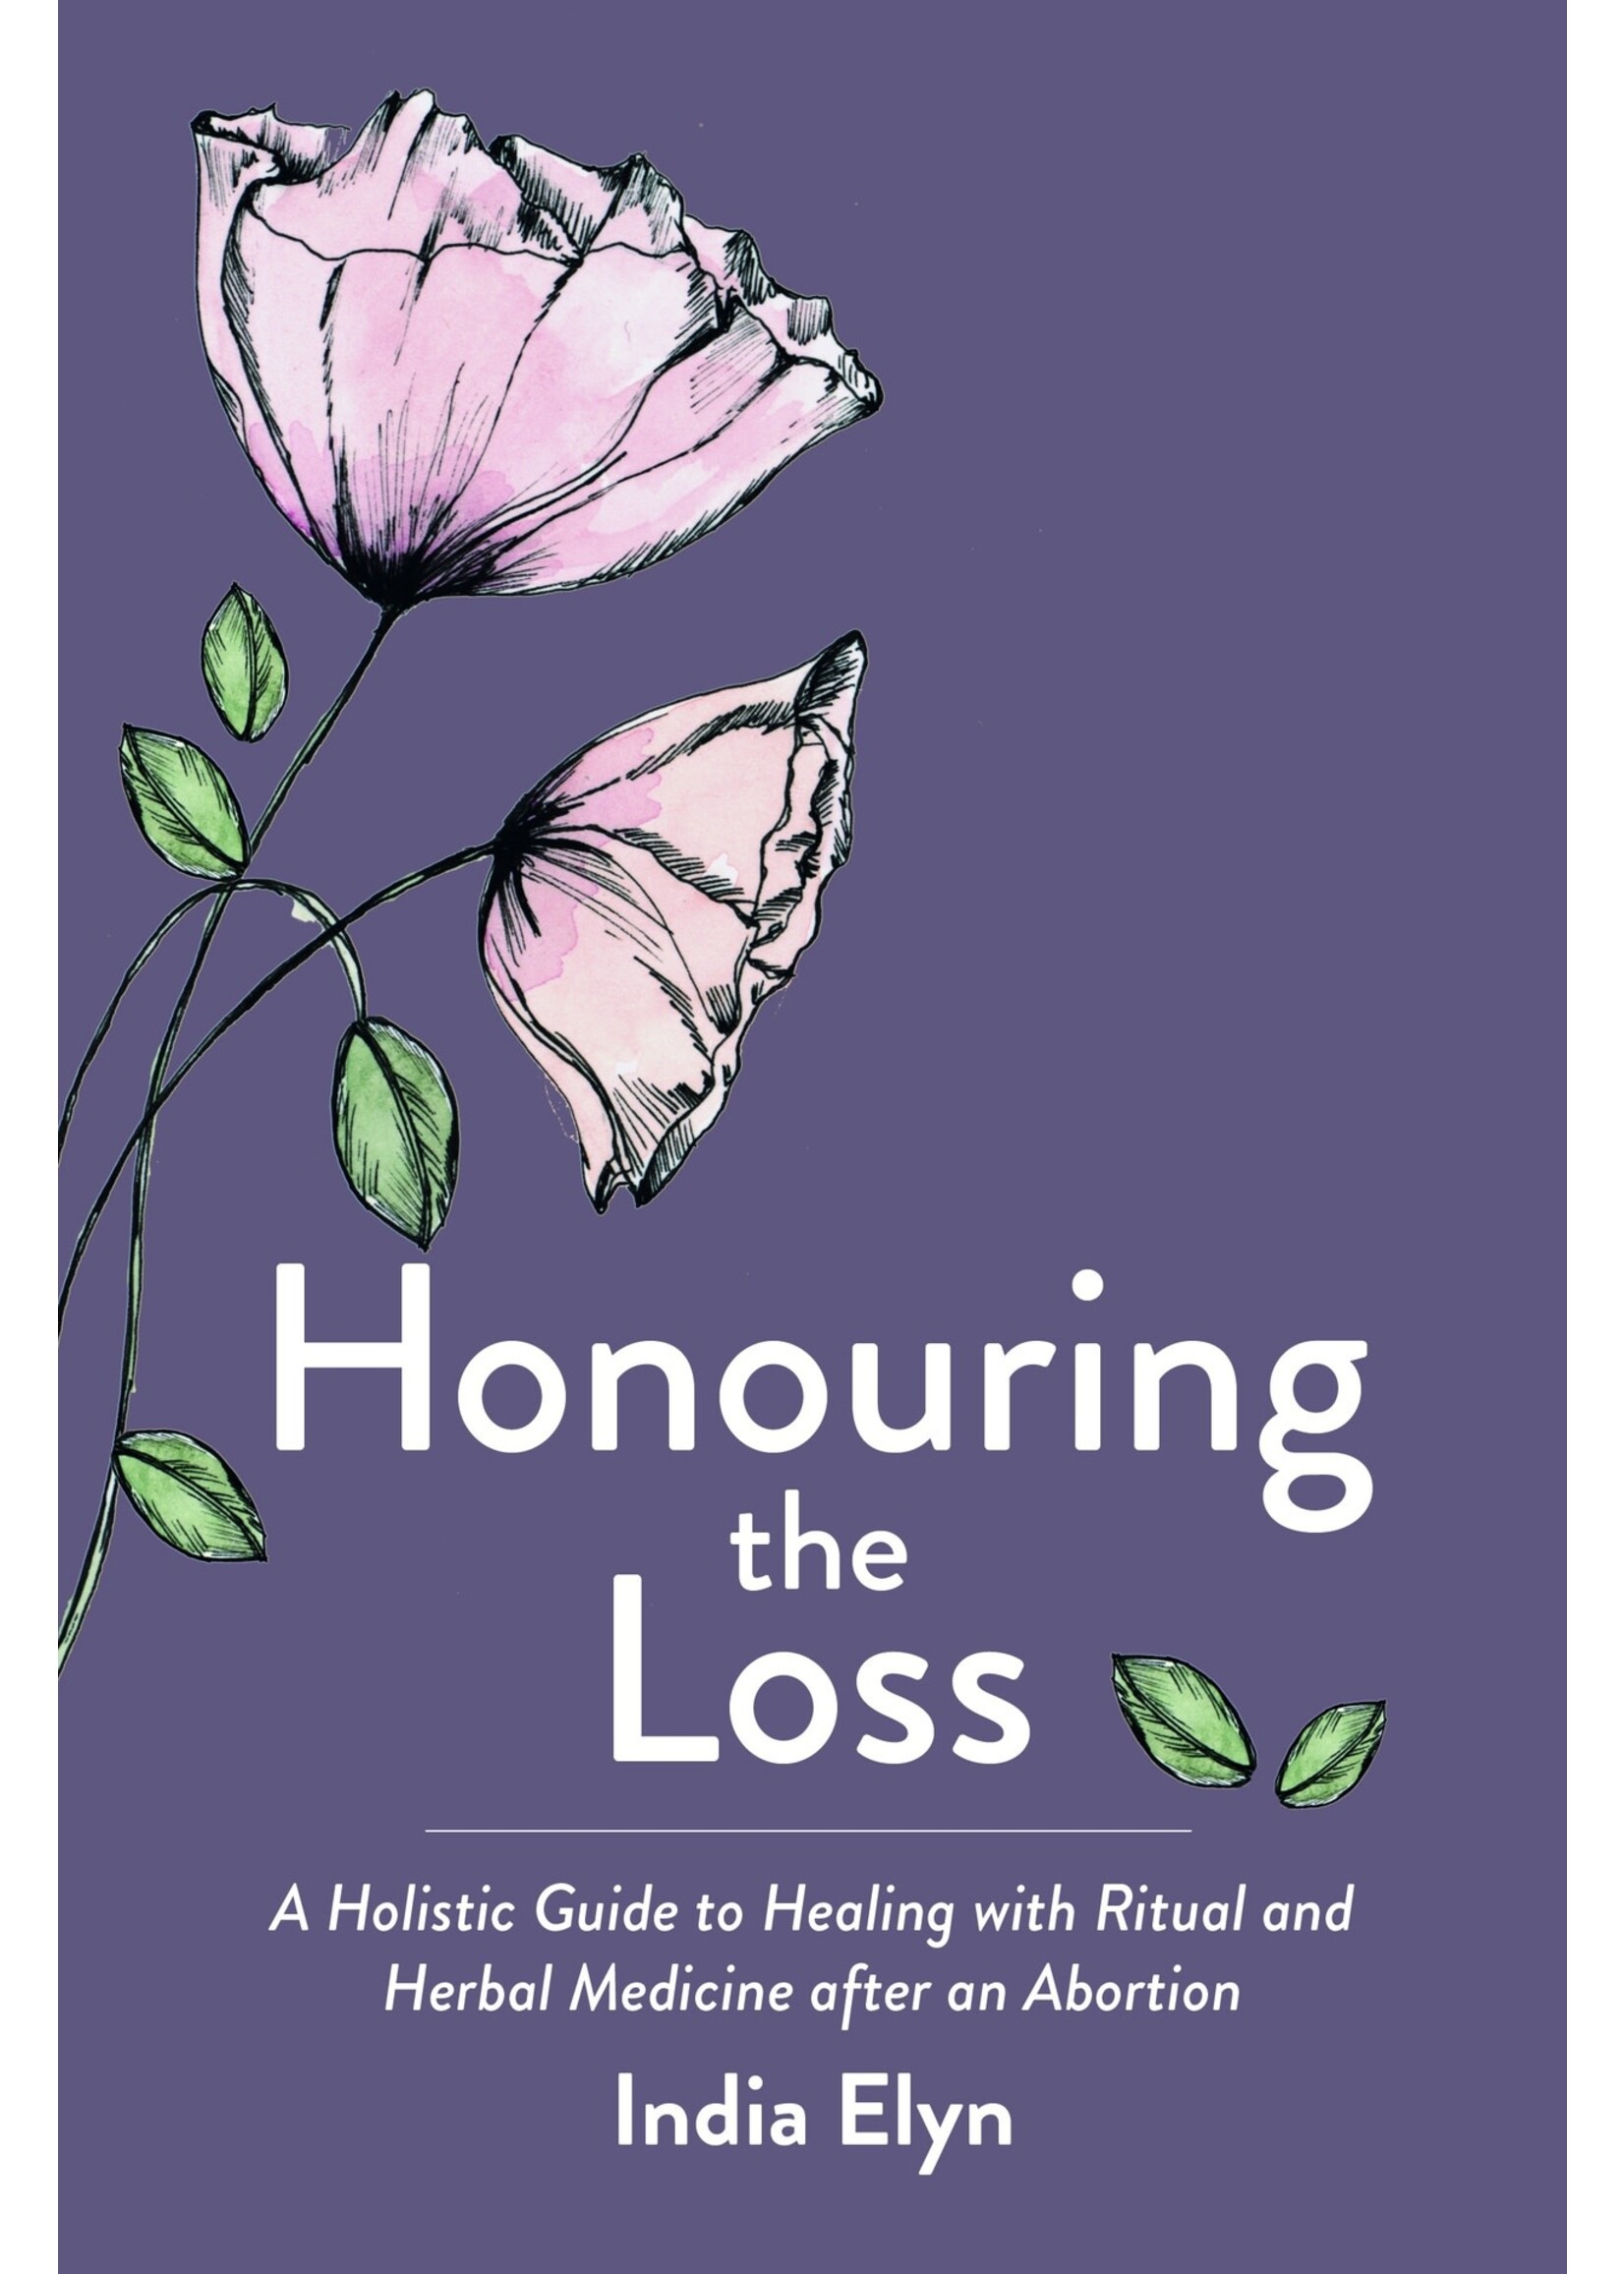 Honouring the Loss: A Holistic Guide to Healing with Ritual and Herbal Medicine After an Abortion by India Elyn